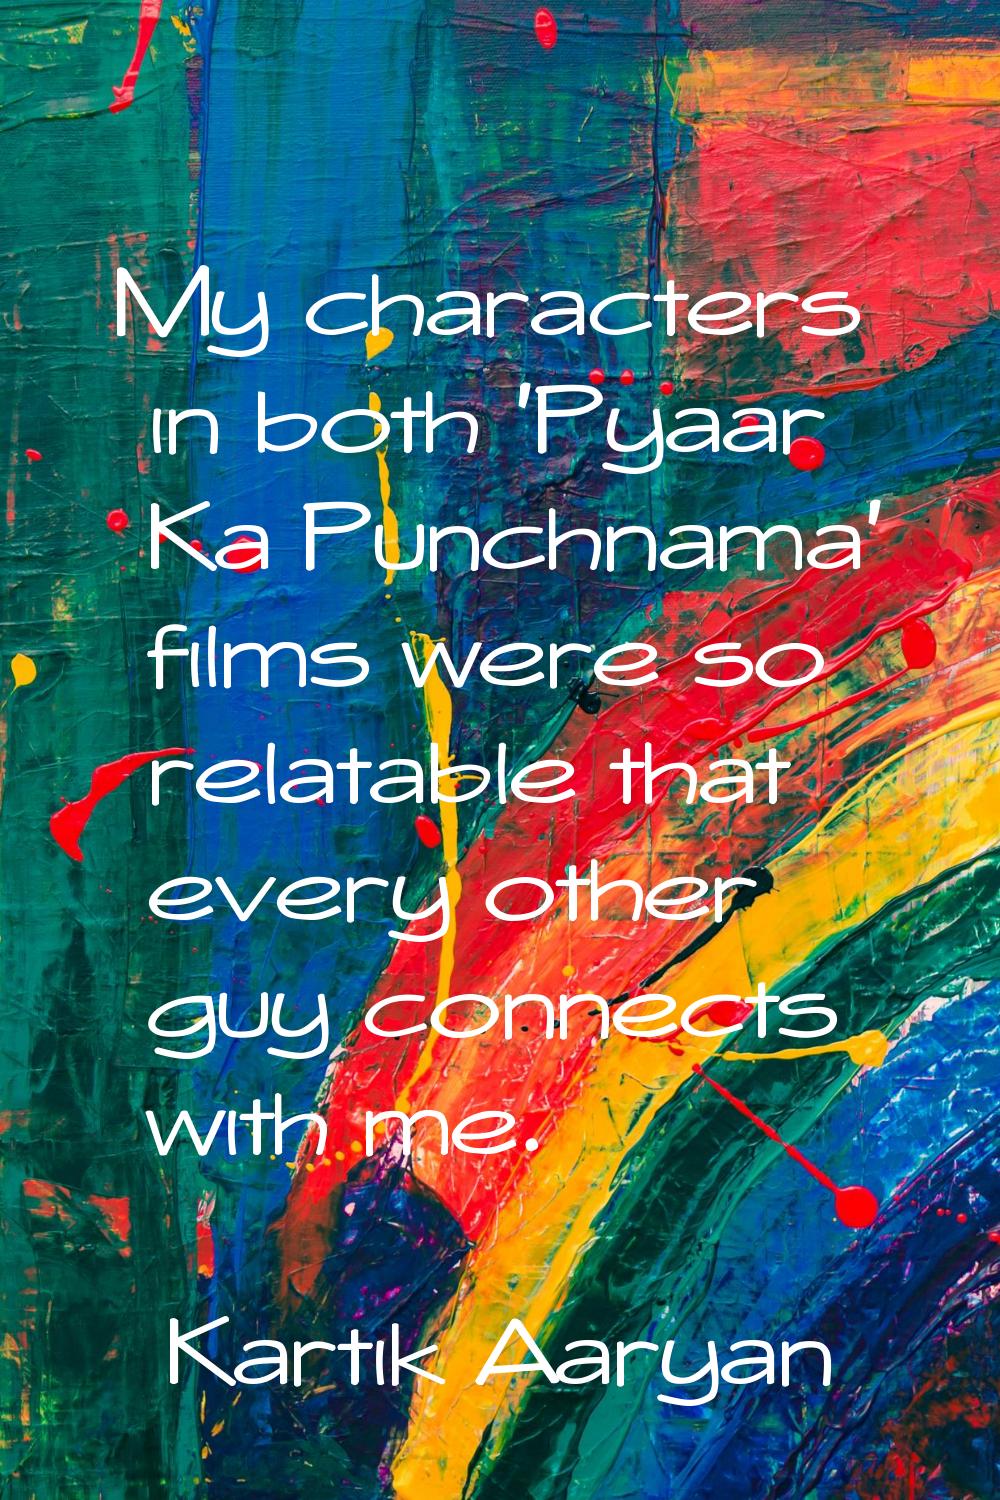 My characters in both 'Pyaar Ka Punchnama' films were so relatable that every other guy connects wi